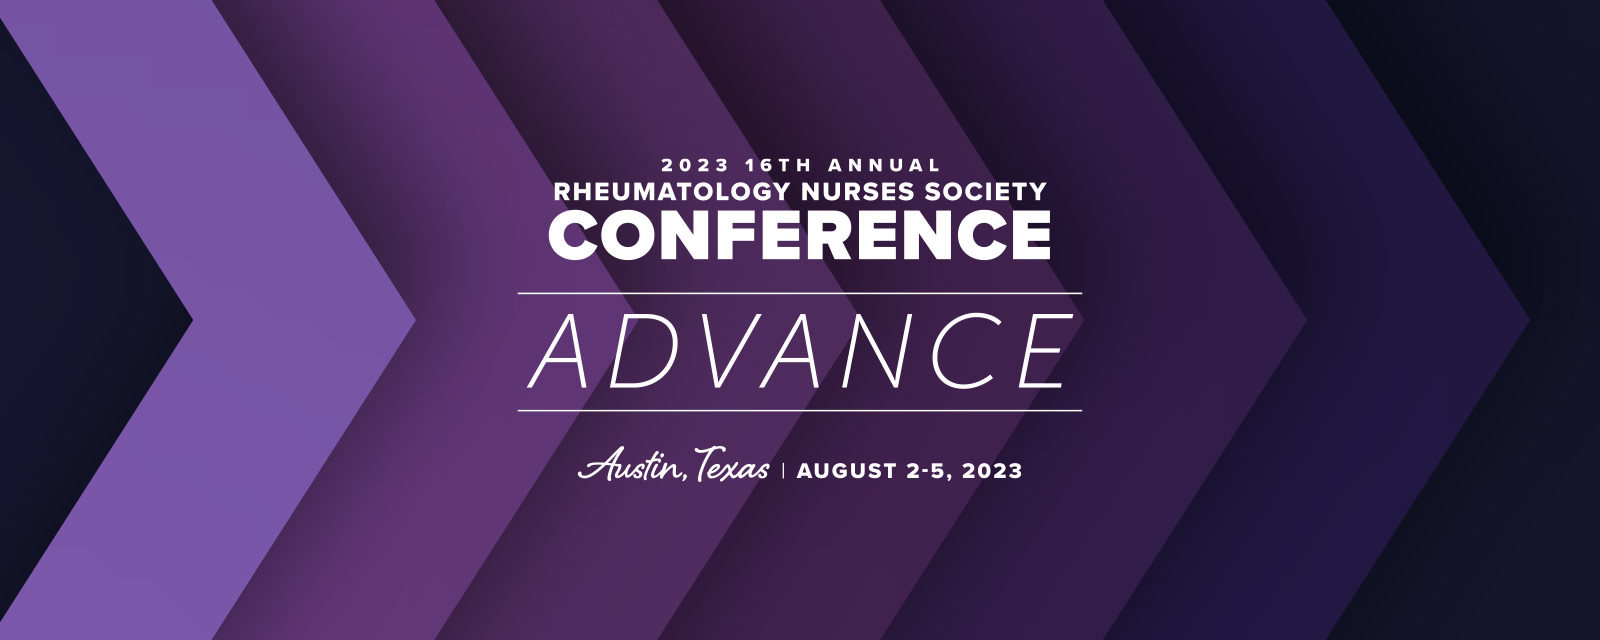 ⏰ Upcoming 2023 RNS Conference DEADLINES